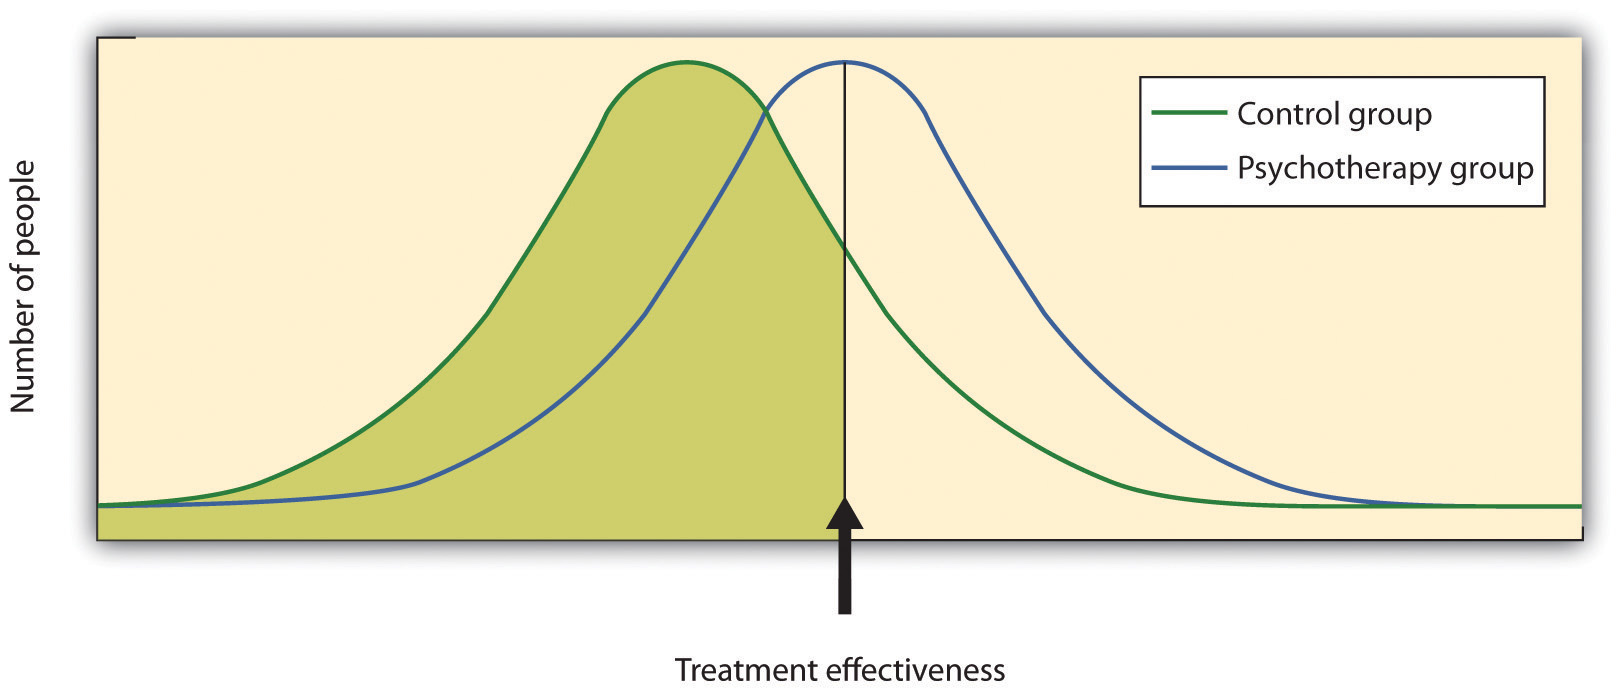 This chart contrasts number of people by treatment effectiveness for control group and psychotherapy group.